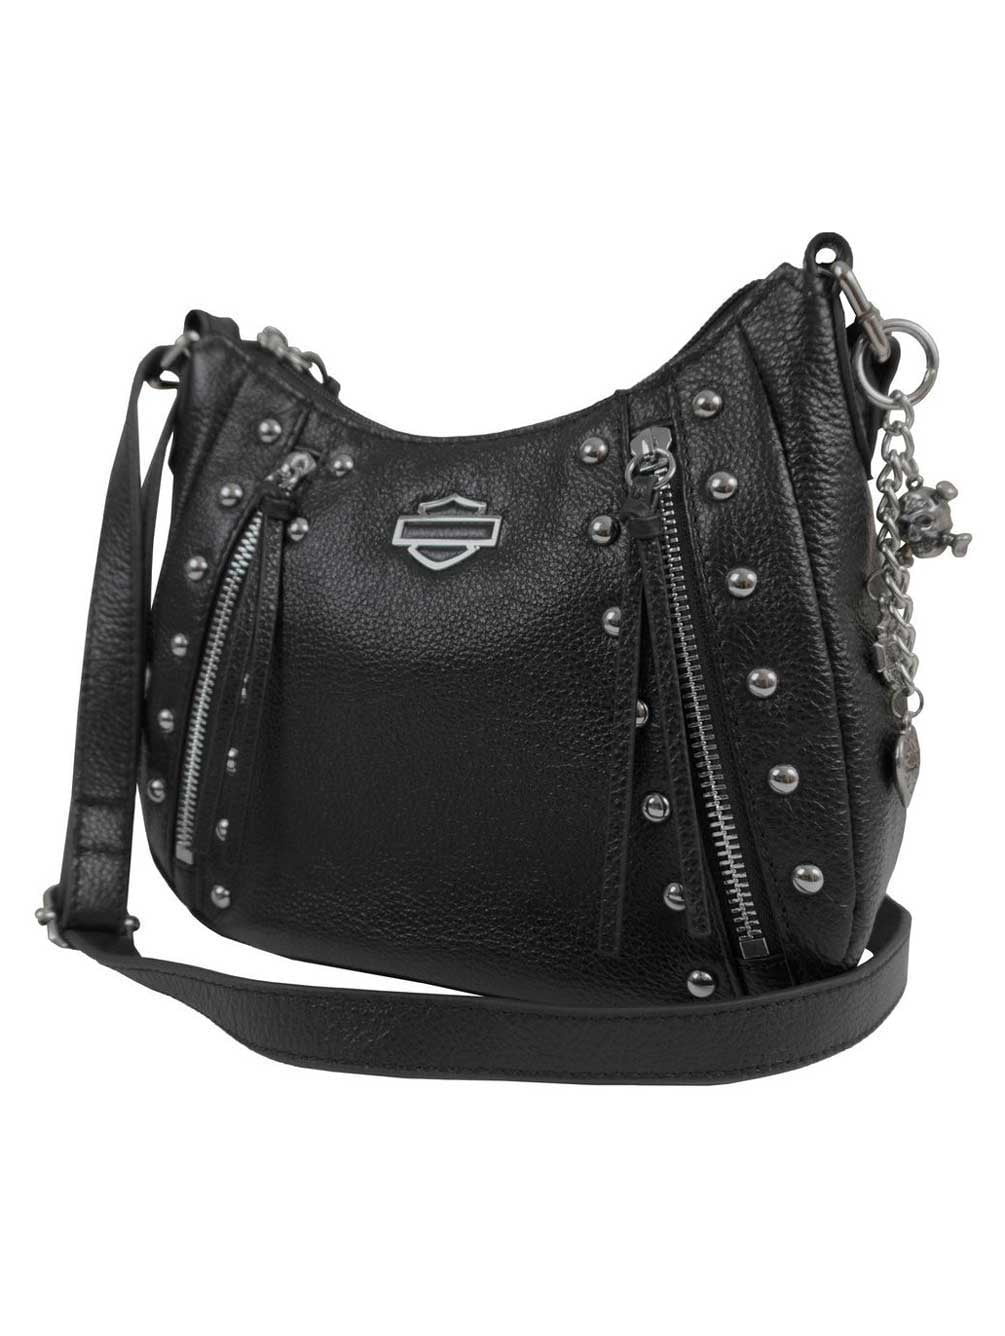 Leather Source Accessory Harley-Davidson® Ombre Effect Studded Leather HOBO  Purse - Gray & Black Handbags | Christmas Gifts | Superstition Harley- Davidson Sales